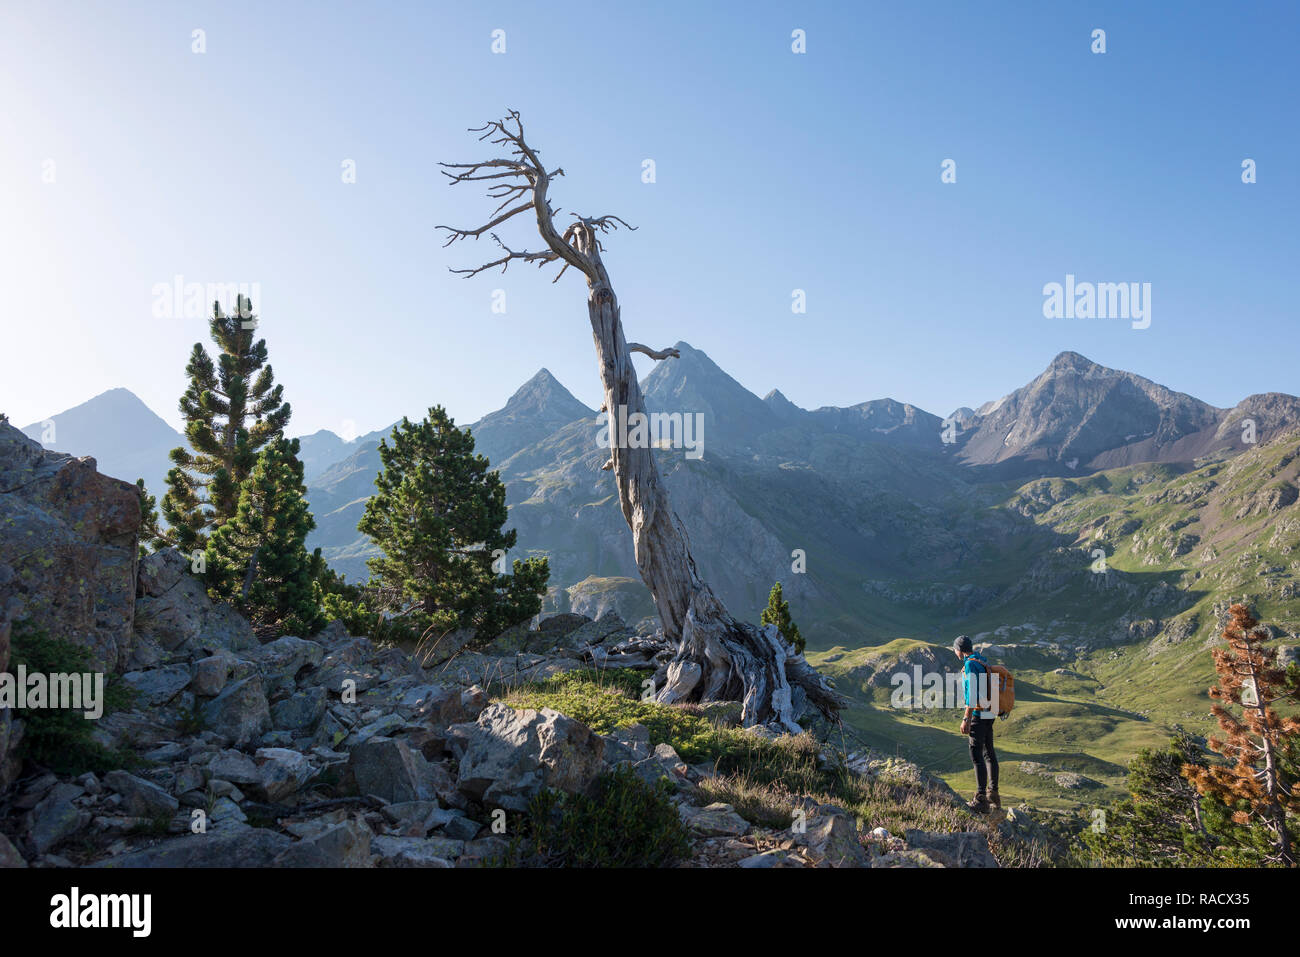 A walker takes in a view of the Pyrenees from near Refugio Respomuso along the GR11 long distance trekking path, Huesca, Spain, Europe Stock Photo